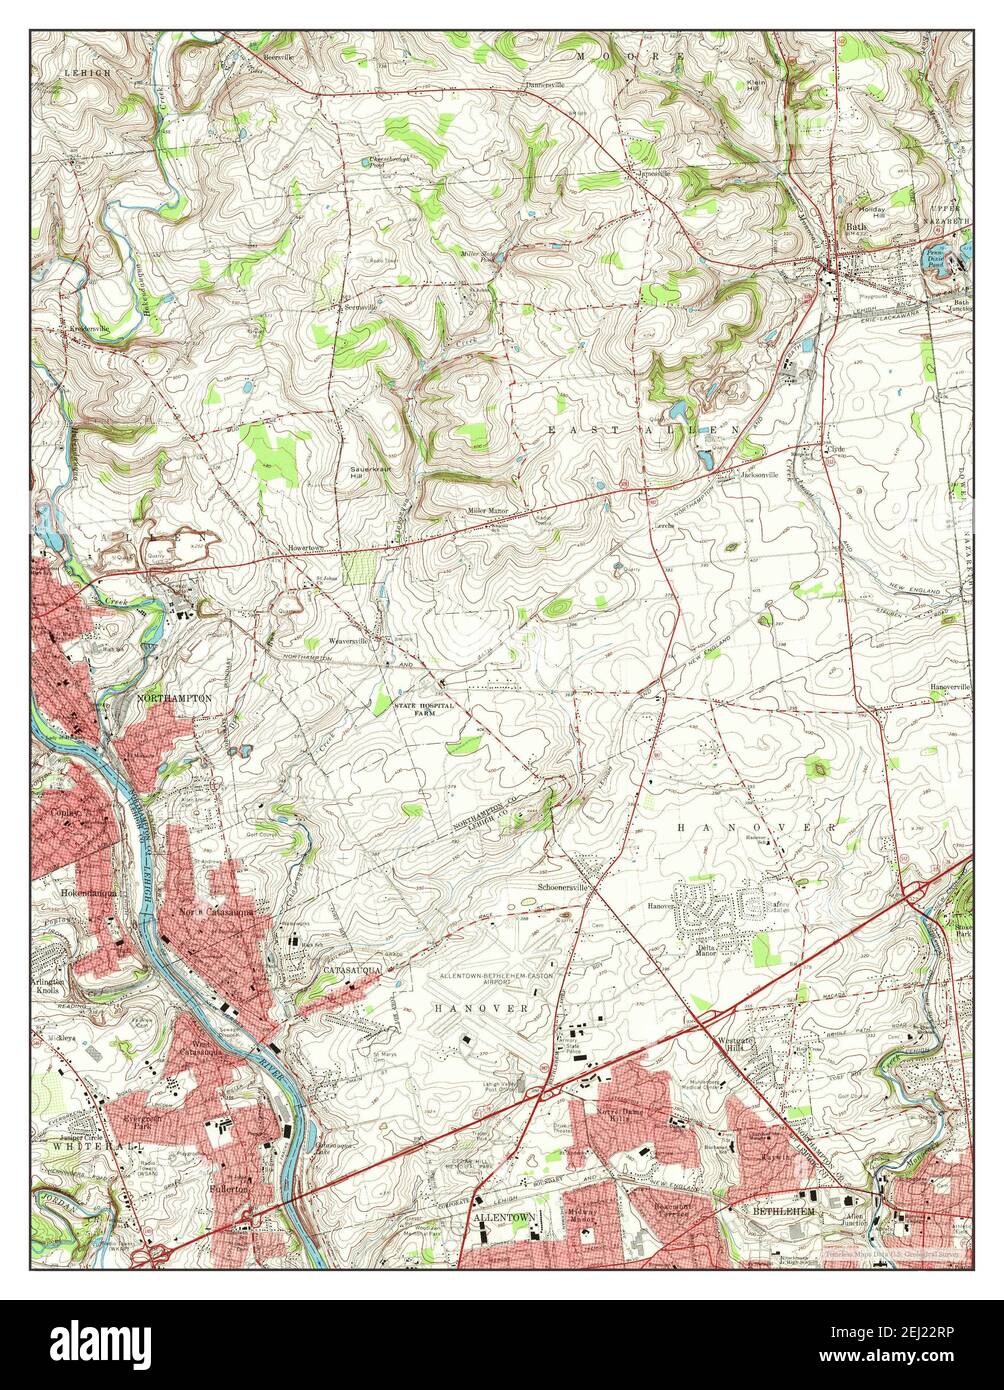 Catasauqua, Pennsylvania, map 1964, 1:24000, United States of America by Timeless Maps, data U.S. Geological Survey Stock Photo